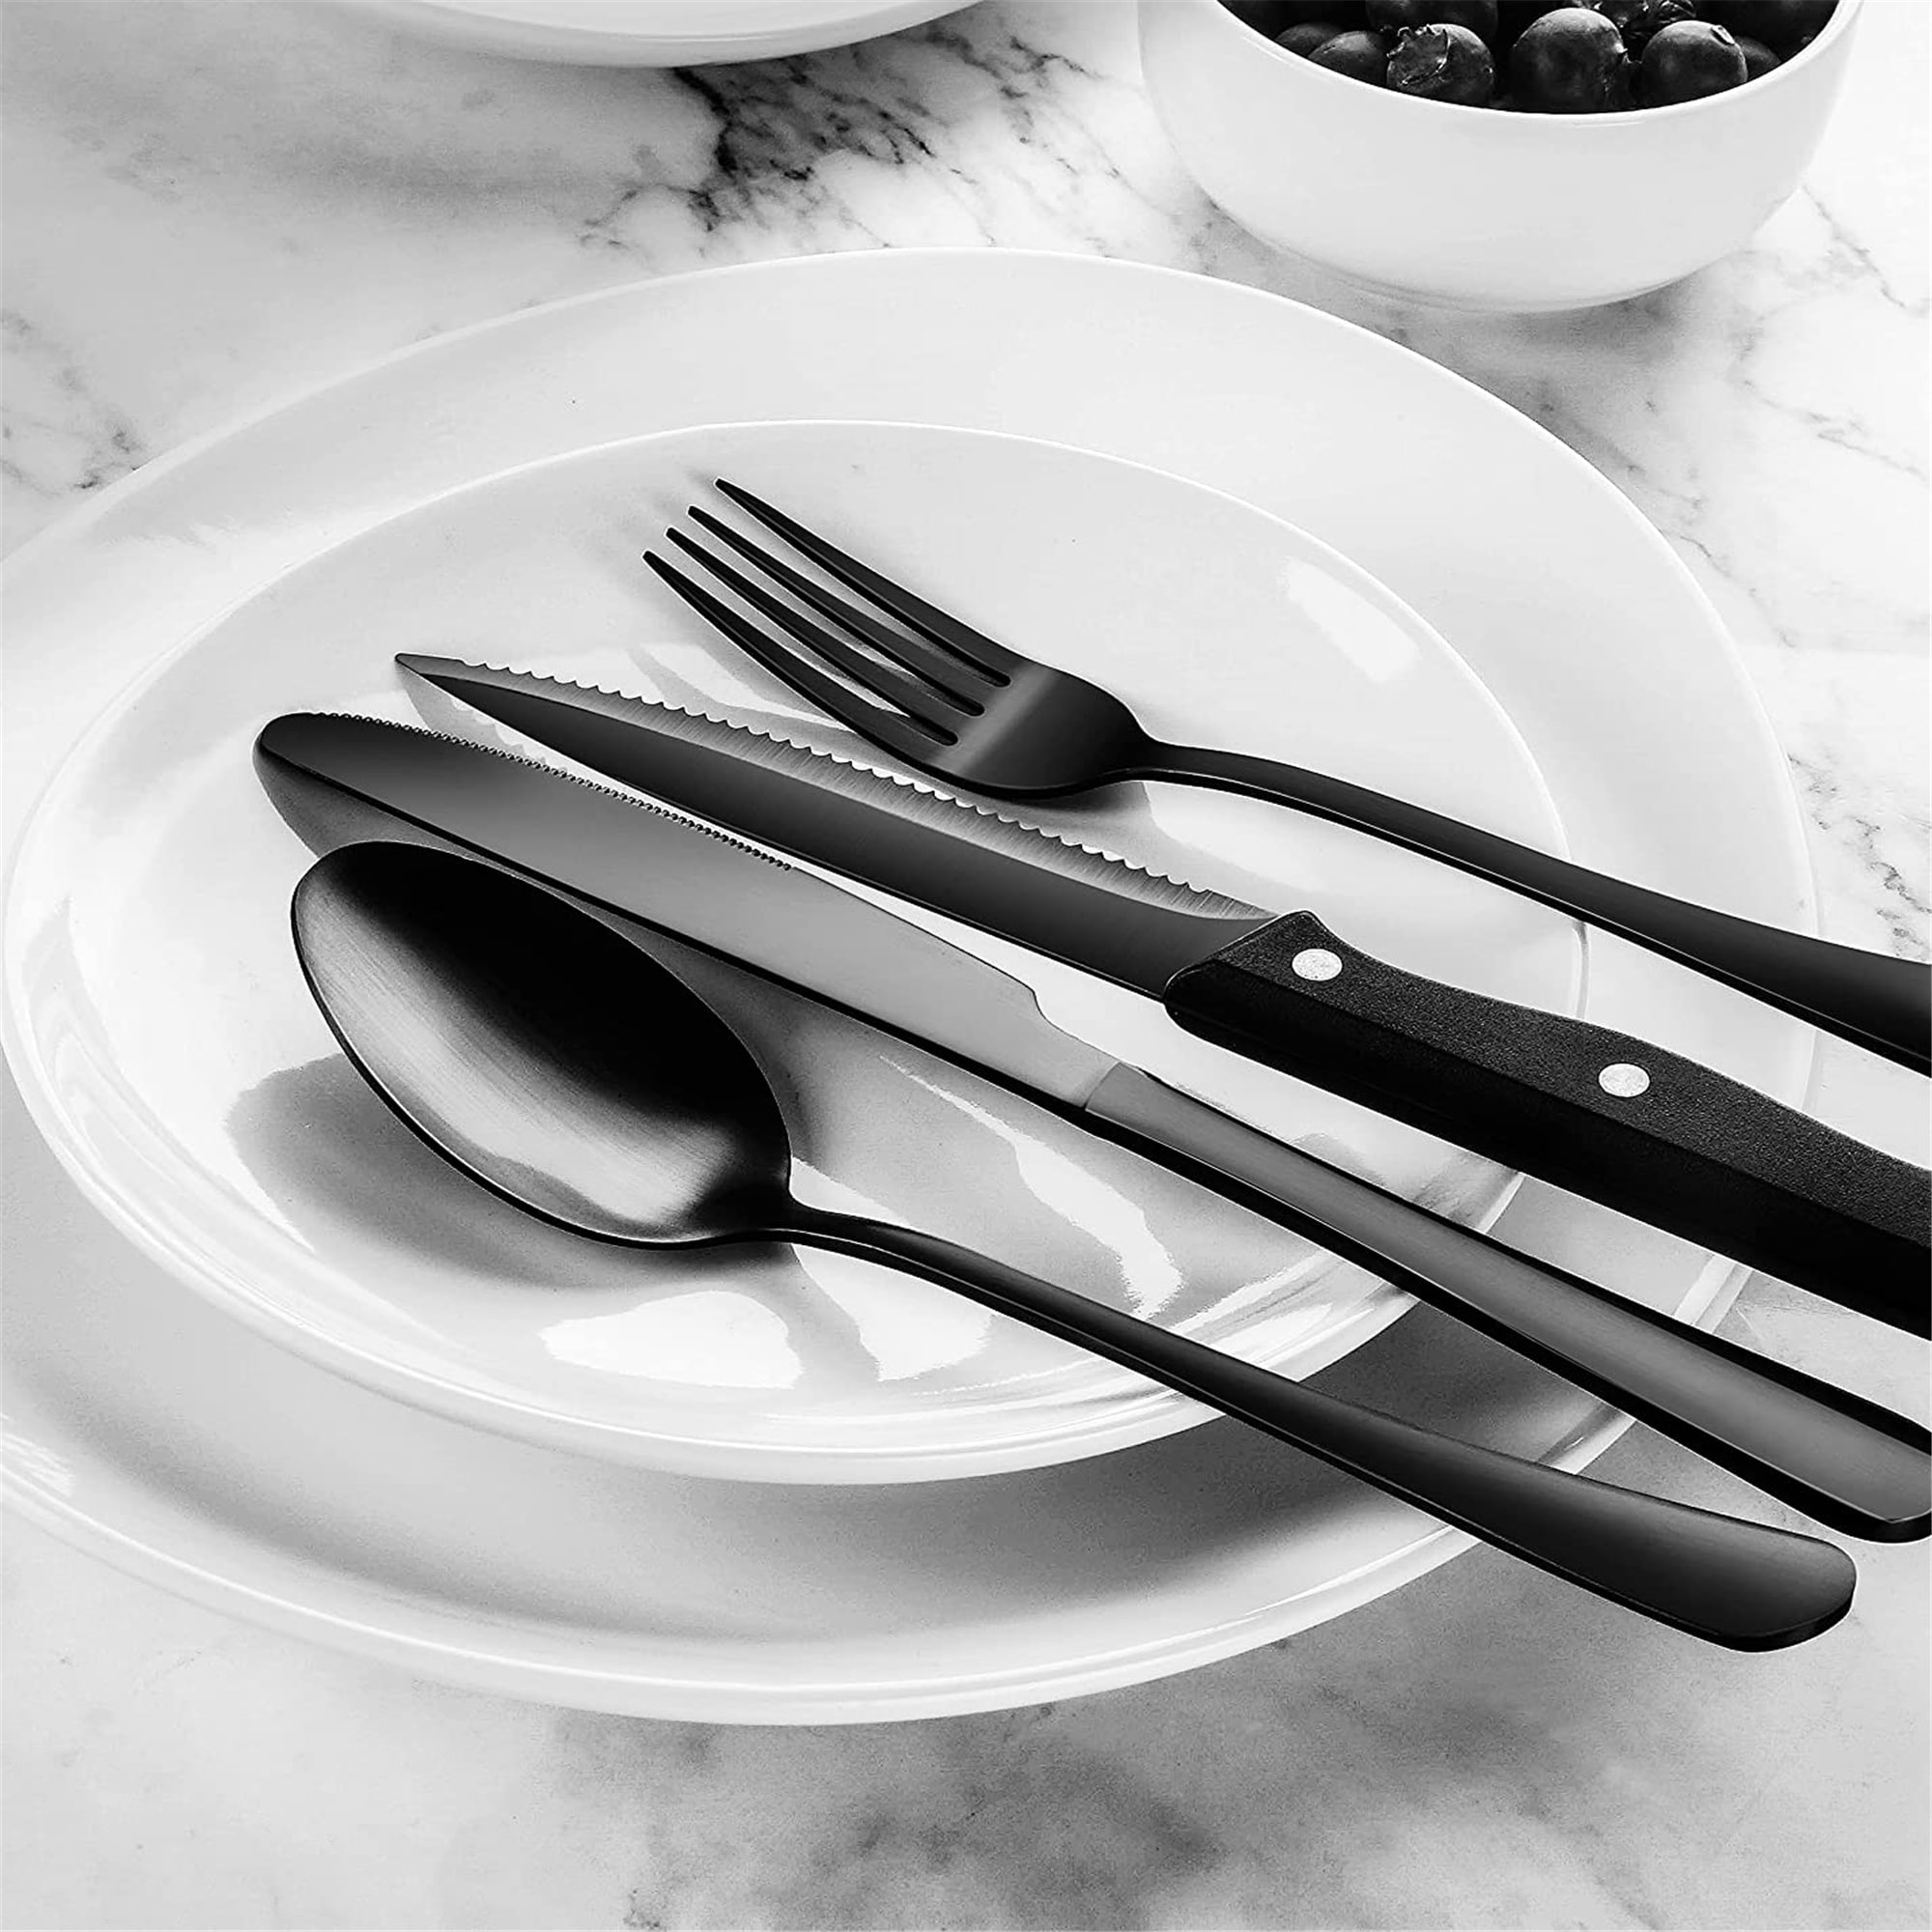 https://ak1.ostkcdn.com/images/products/is/images/direct/fdf1291e0ac53d5f38e8efef478700aac46b17a4/Matte-Black-Silverware-Set%2C-24-48-Pieces-Stainless-Steel-Flatware-set-with-Steak-Knives-for-8%2C-Tableware-Cutlery-Set%2C-Utensils.jpg